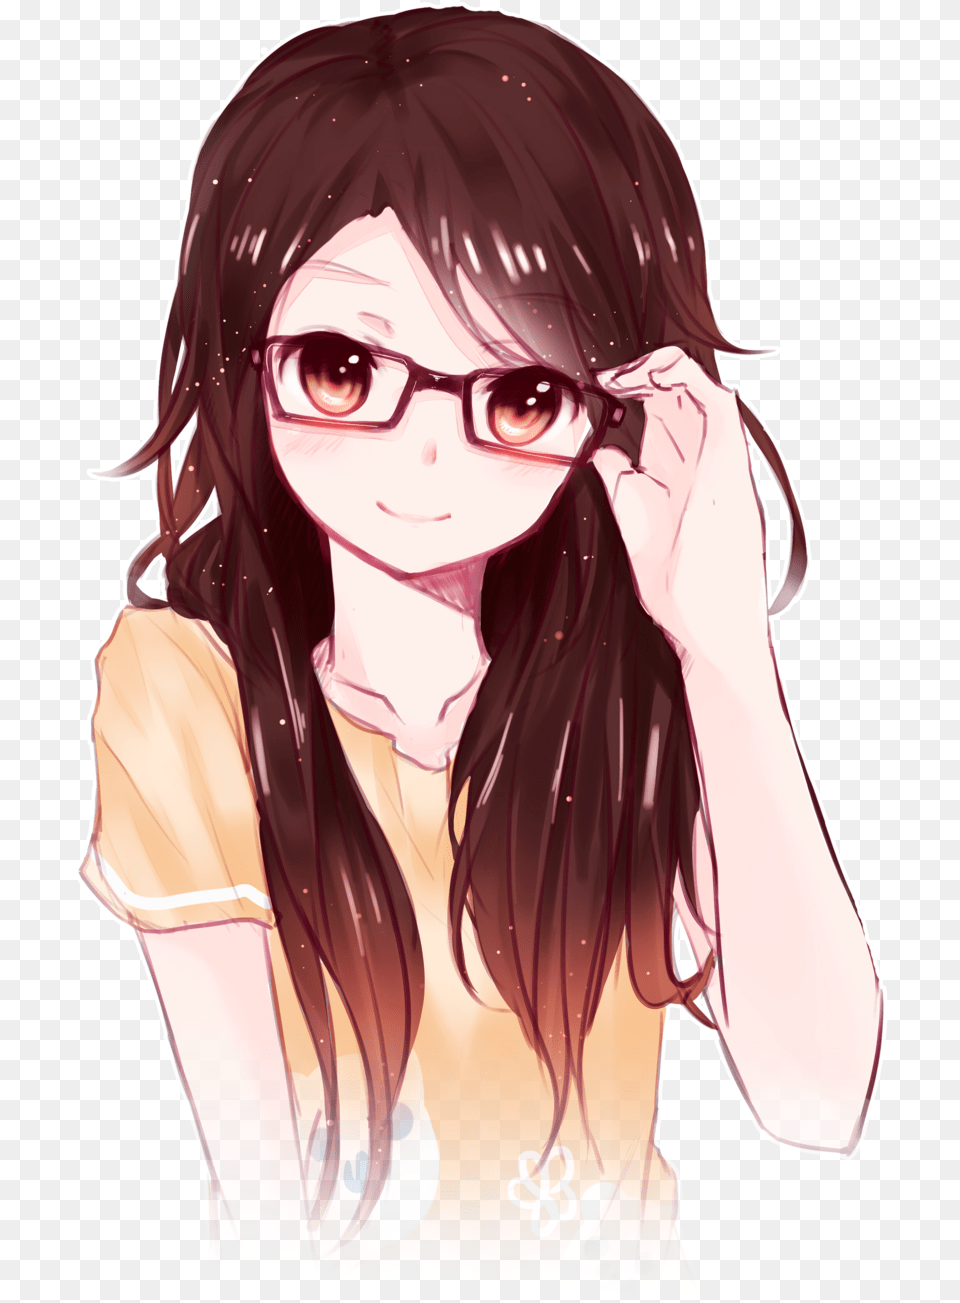 What Are The Lolis Brunette Anime Girl With Glasses, Publication, Book, Comics, Woman Free Png